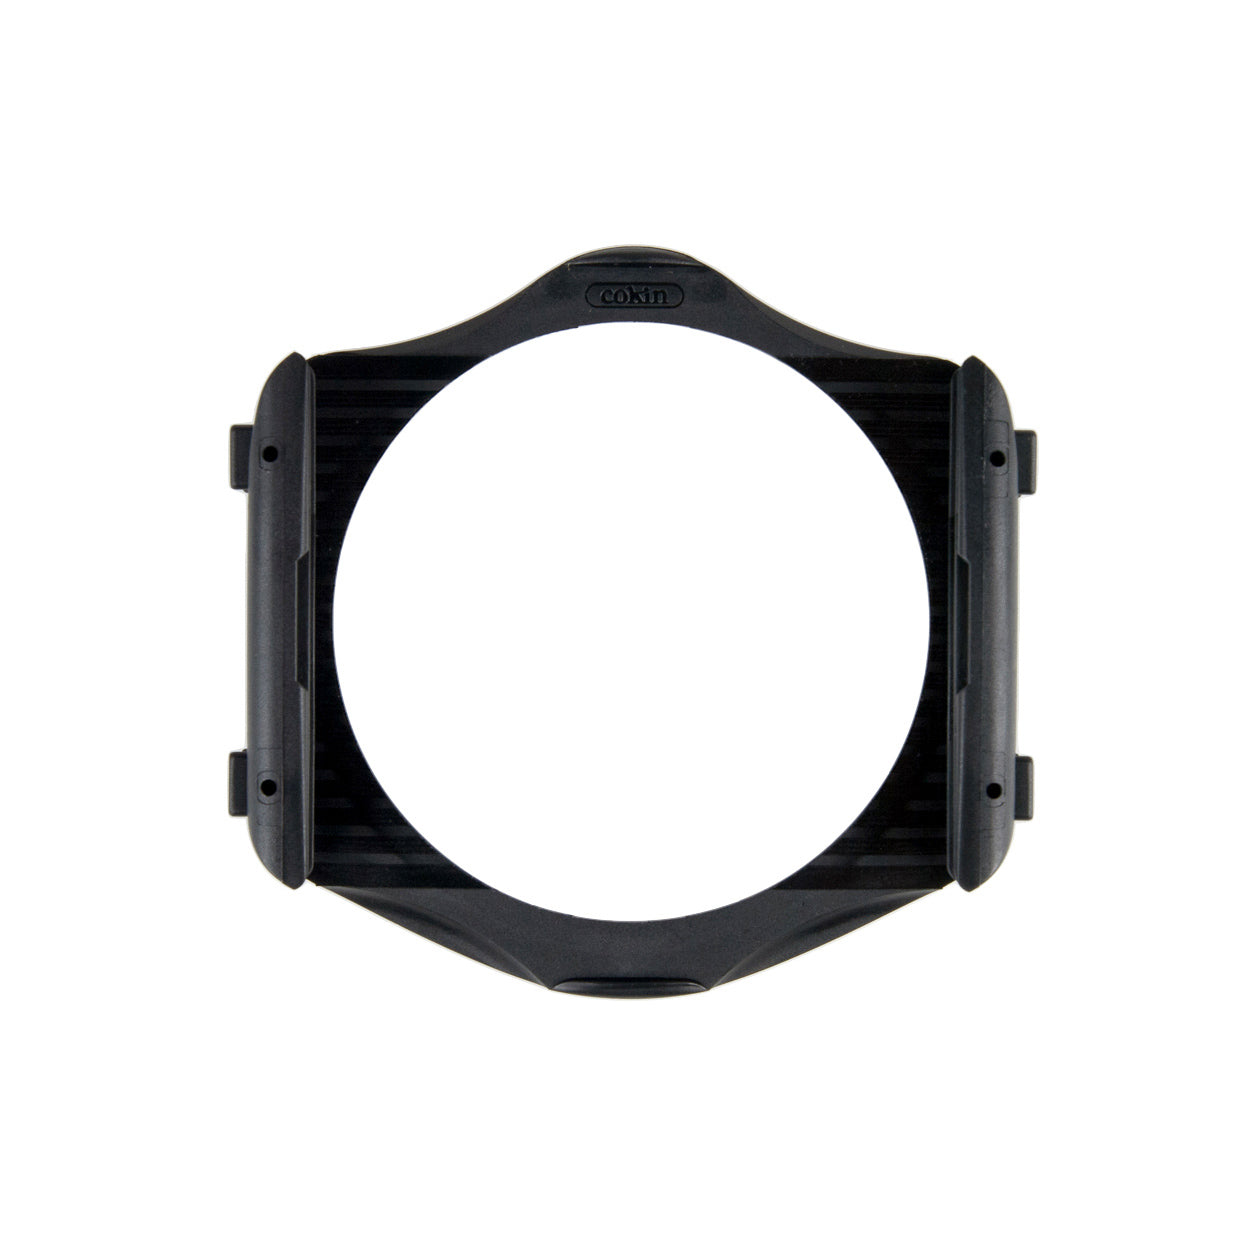 P-Series Wide-Angle Filter Holder